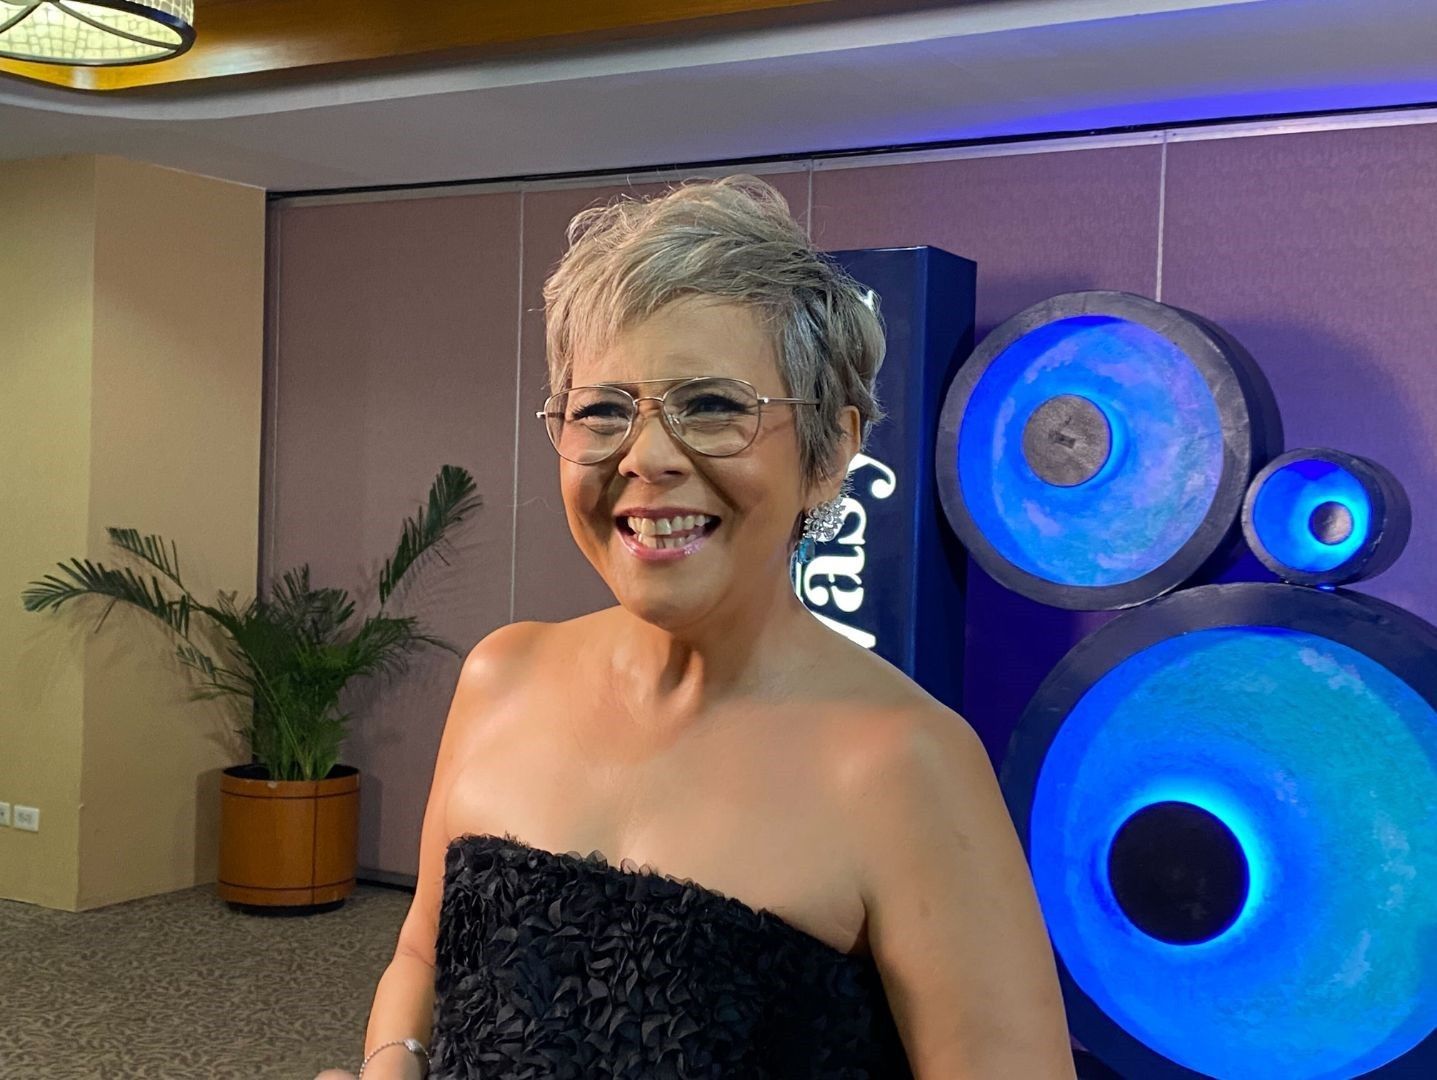 Hollywood strikes: Dolly de Leon can promote local films, but not international projects